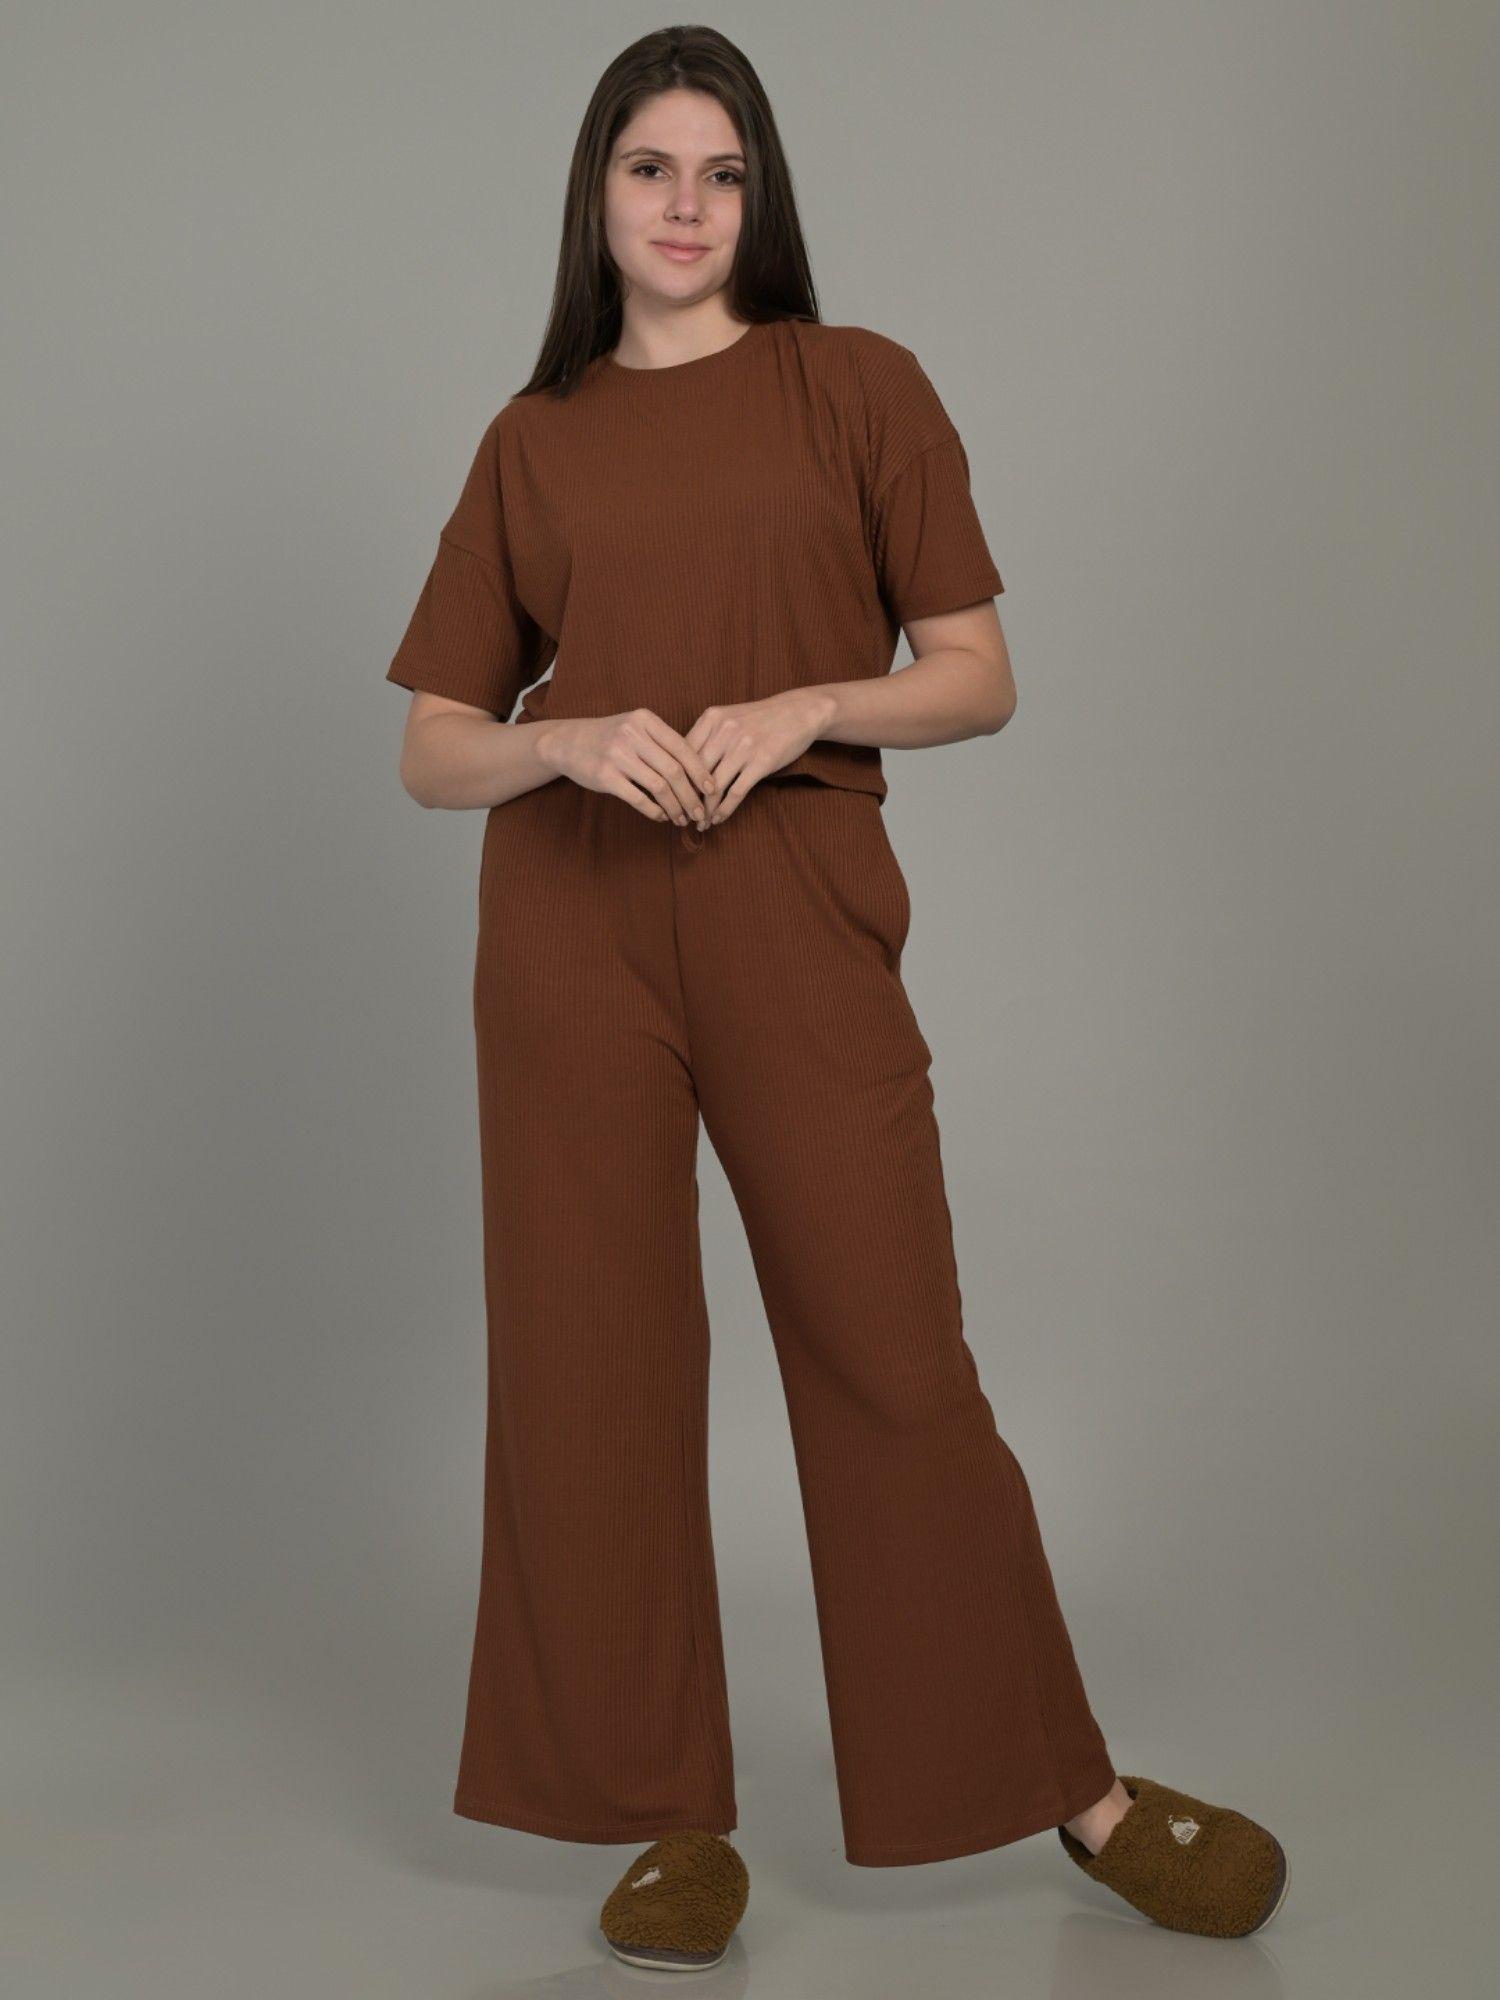 cotton & spandex solid brown top with pyjama (set of 2)